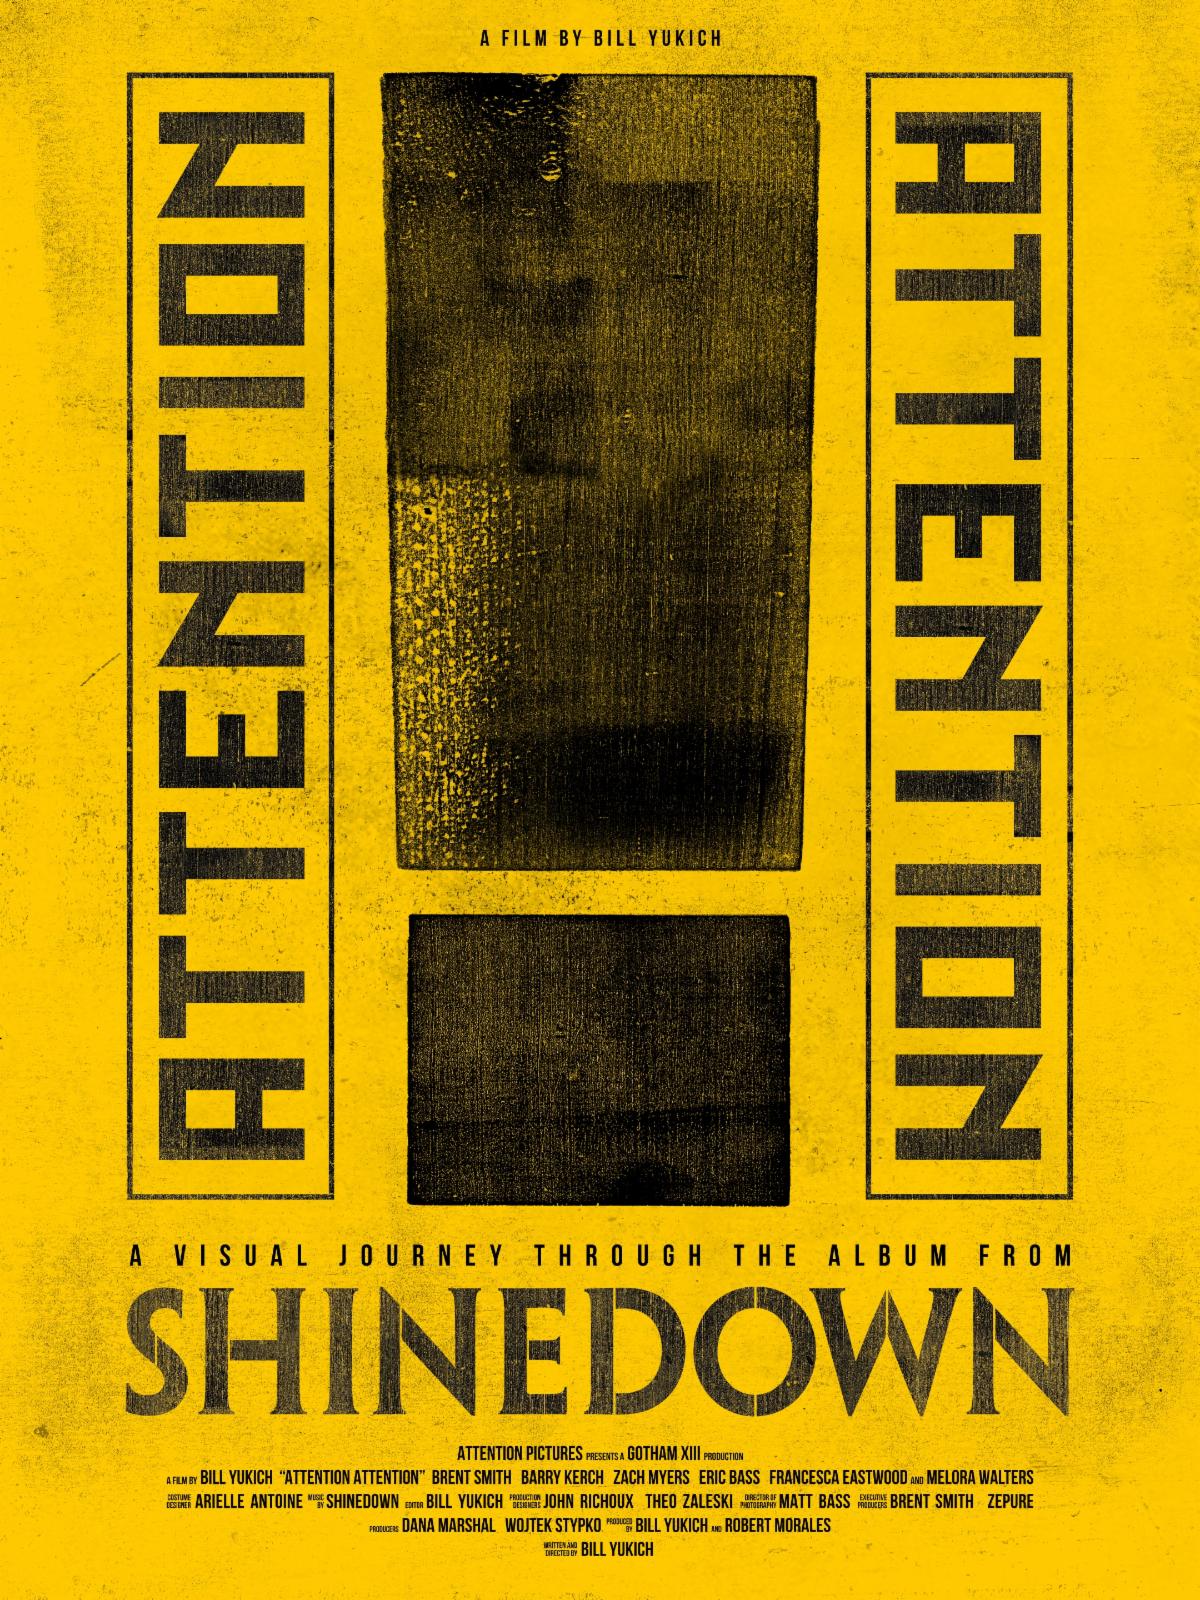 Shinedown ATTENTION ATTENTION Feature Film Experience Out Now!